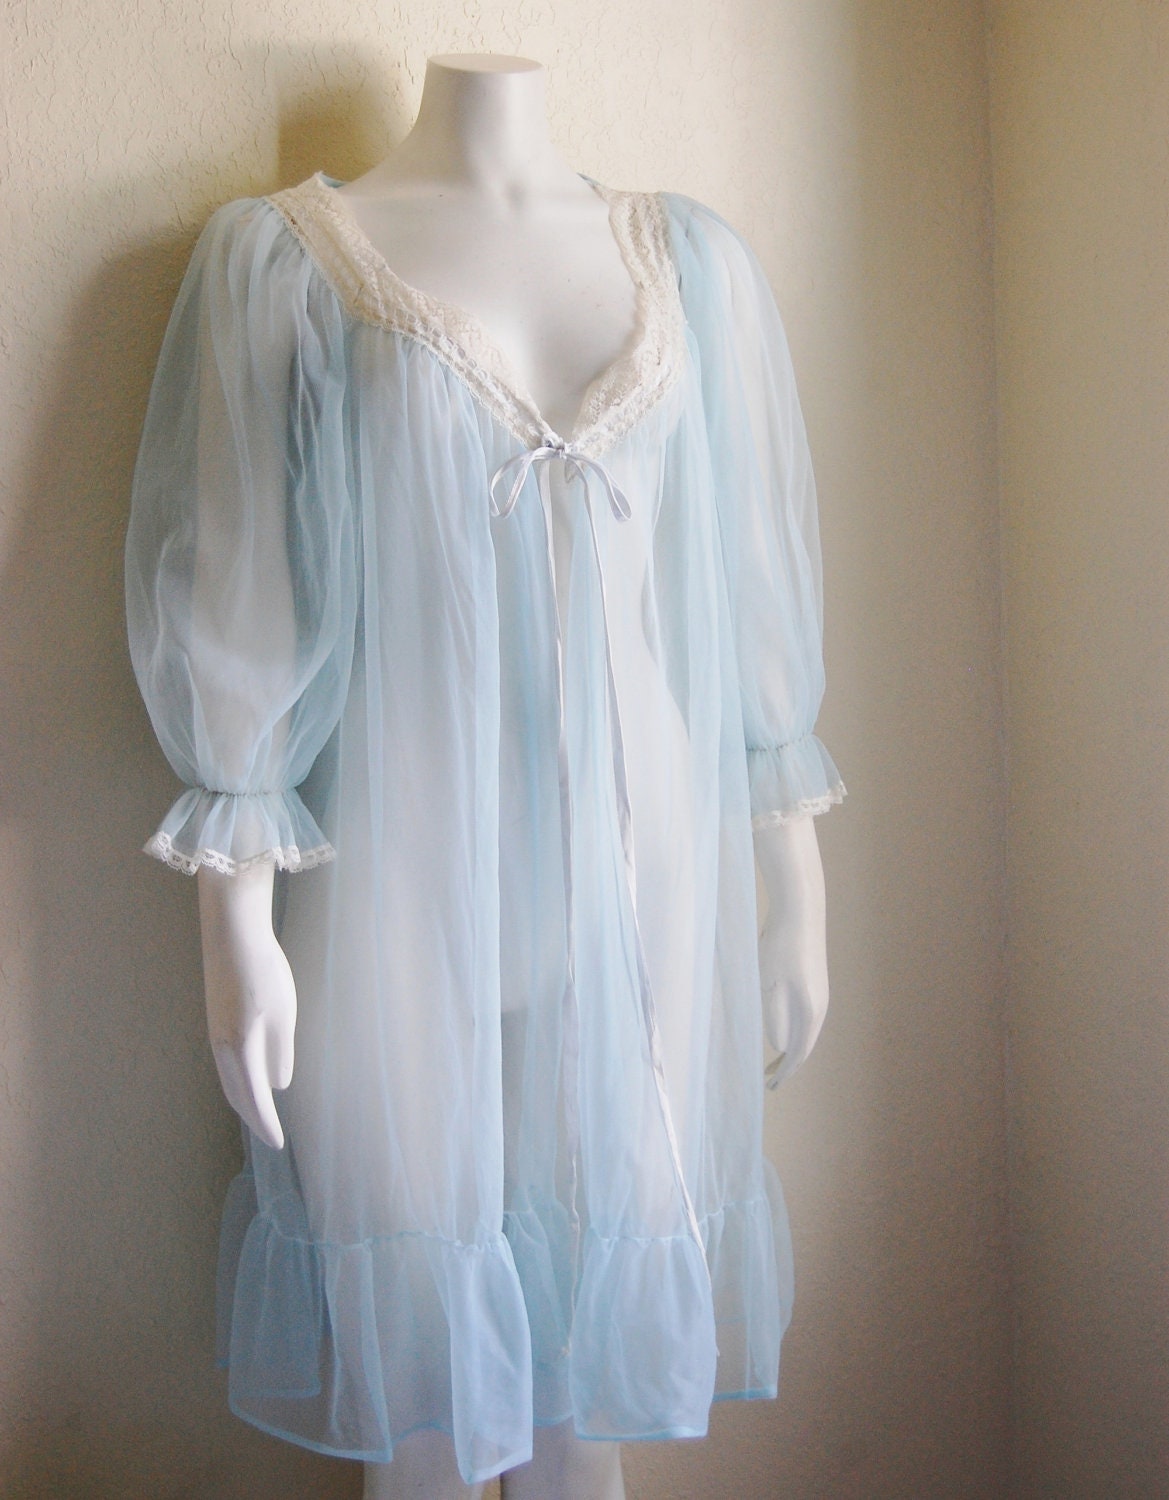 Blue Sheer Robe Peignoir Negligee Vintage size Large Lace